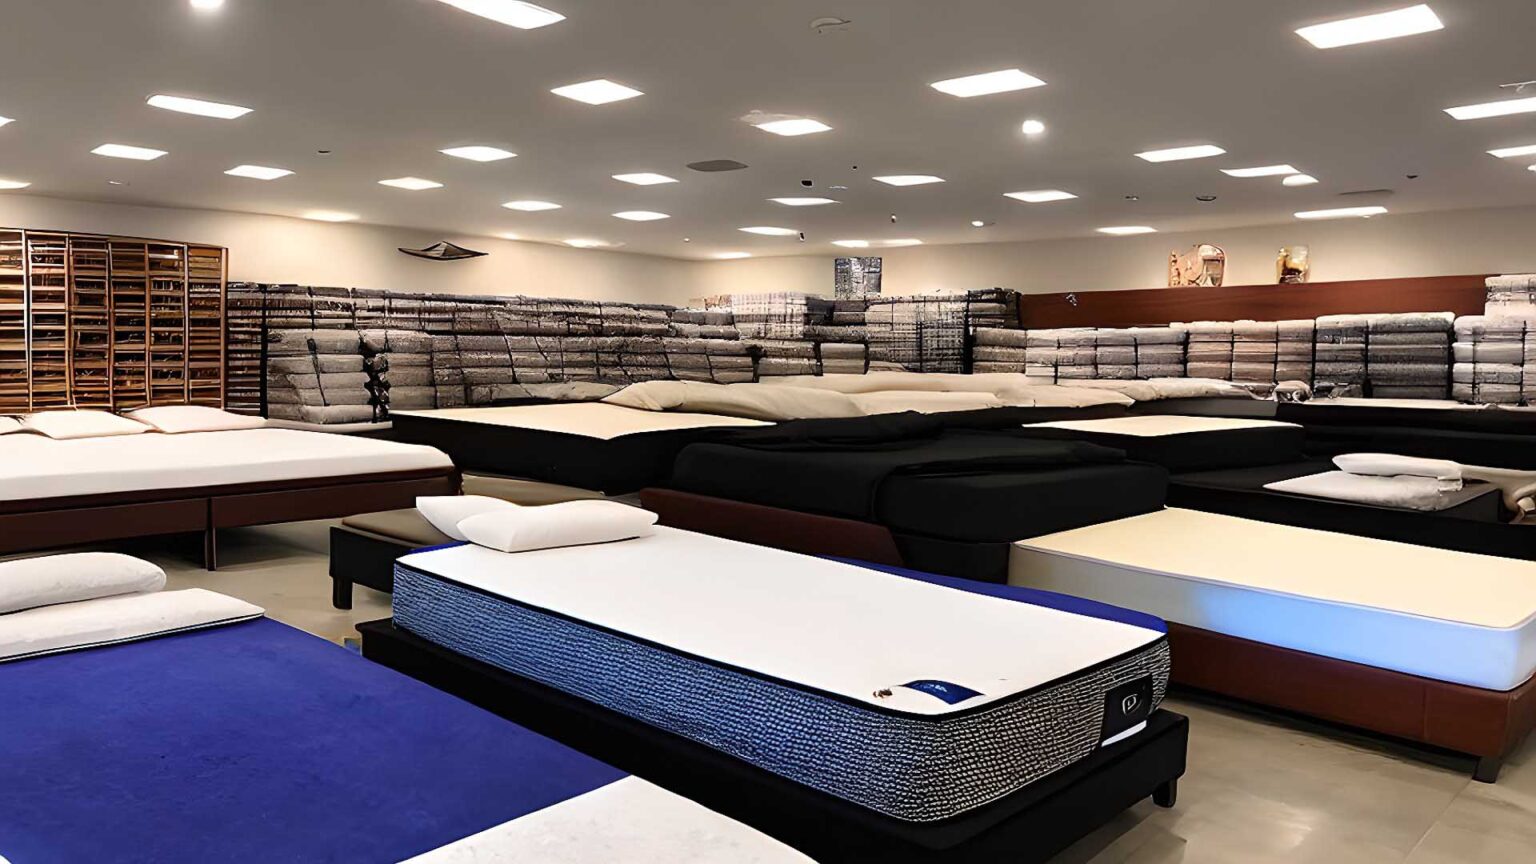 Mattress Stores, mattress dealers, and mattress retailers near me in Crystal Lake, IL